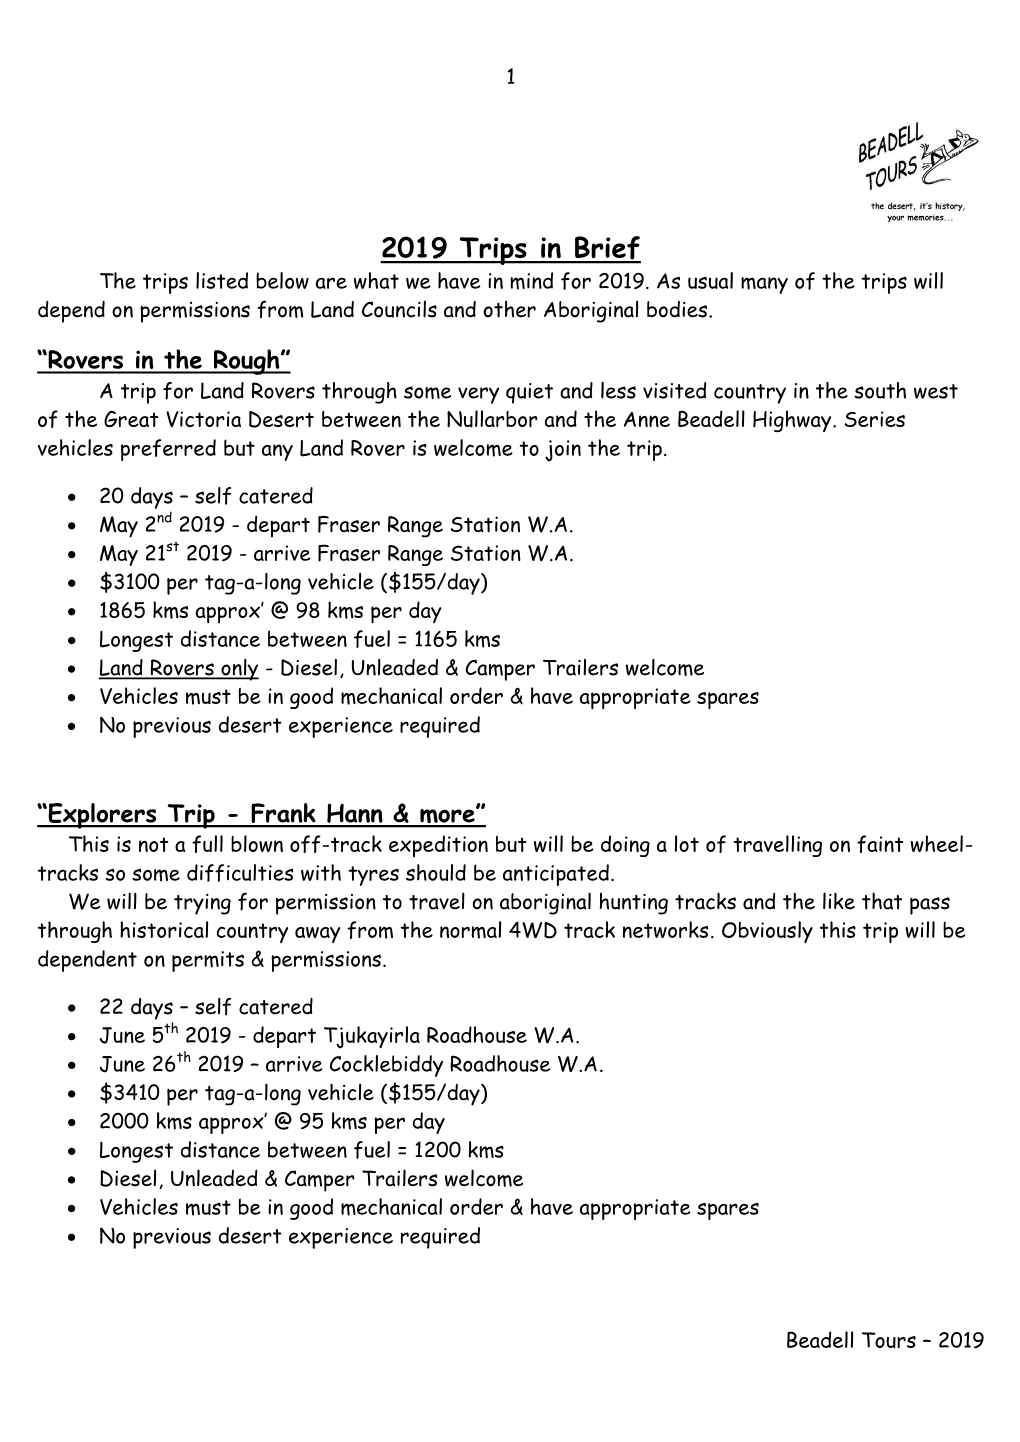 2019 Trips in Brief the Trips Listed Below Are What We Have in Mind for 2019